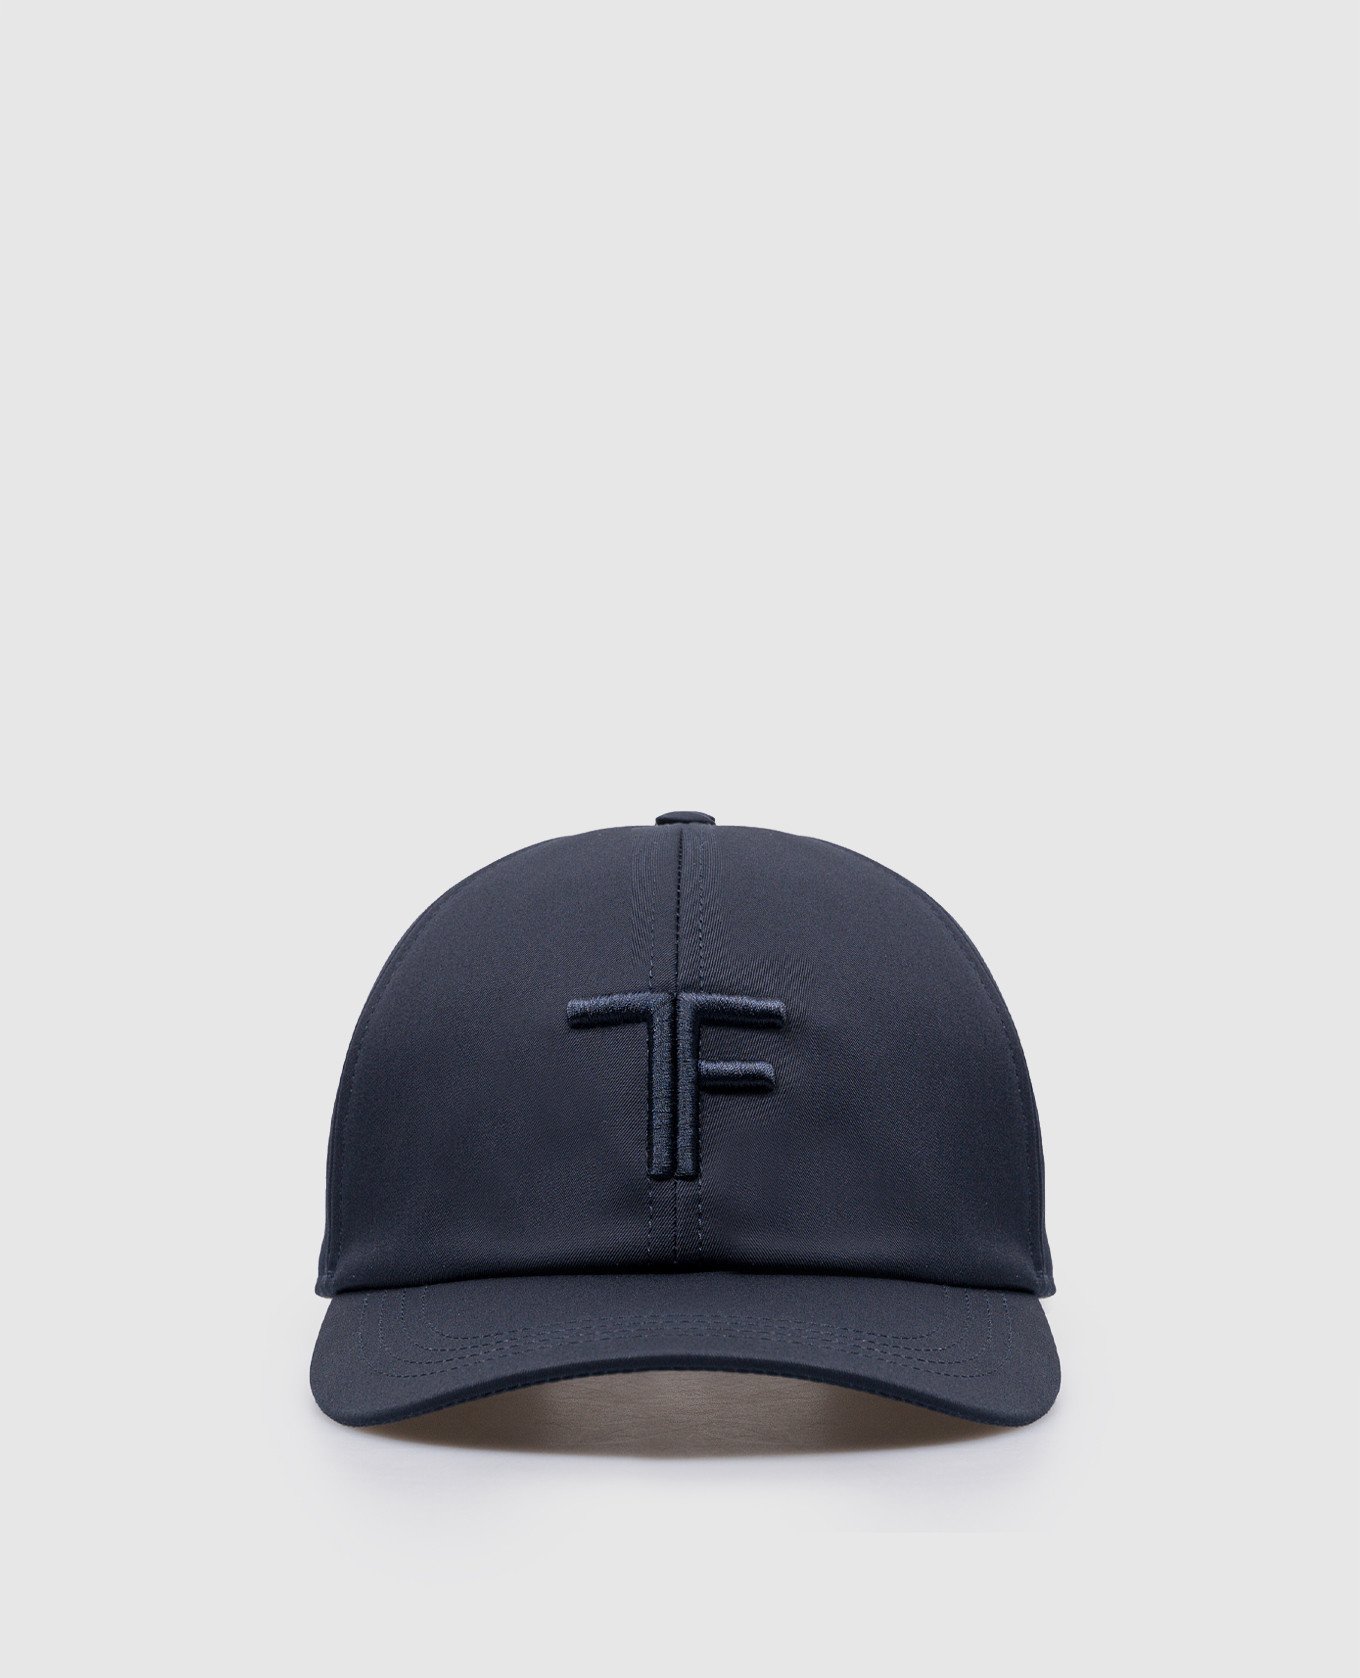 Blue cap with textured logo